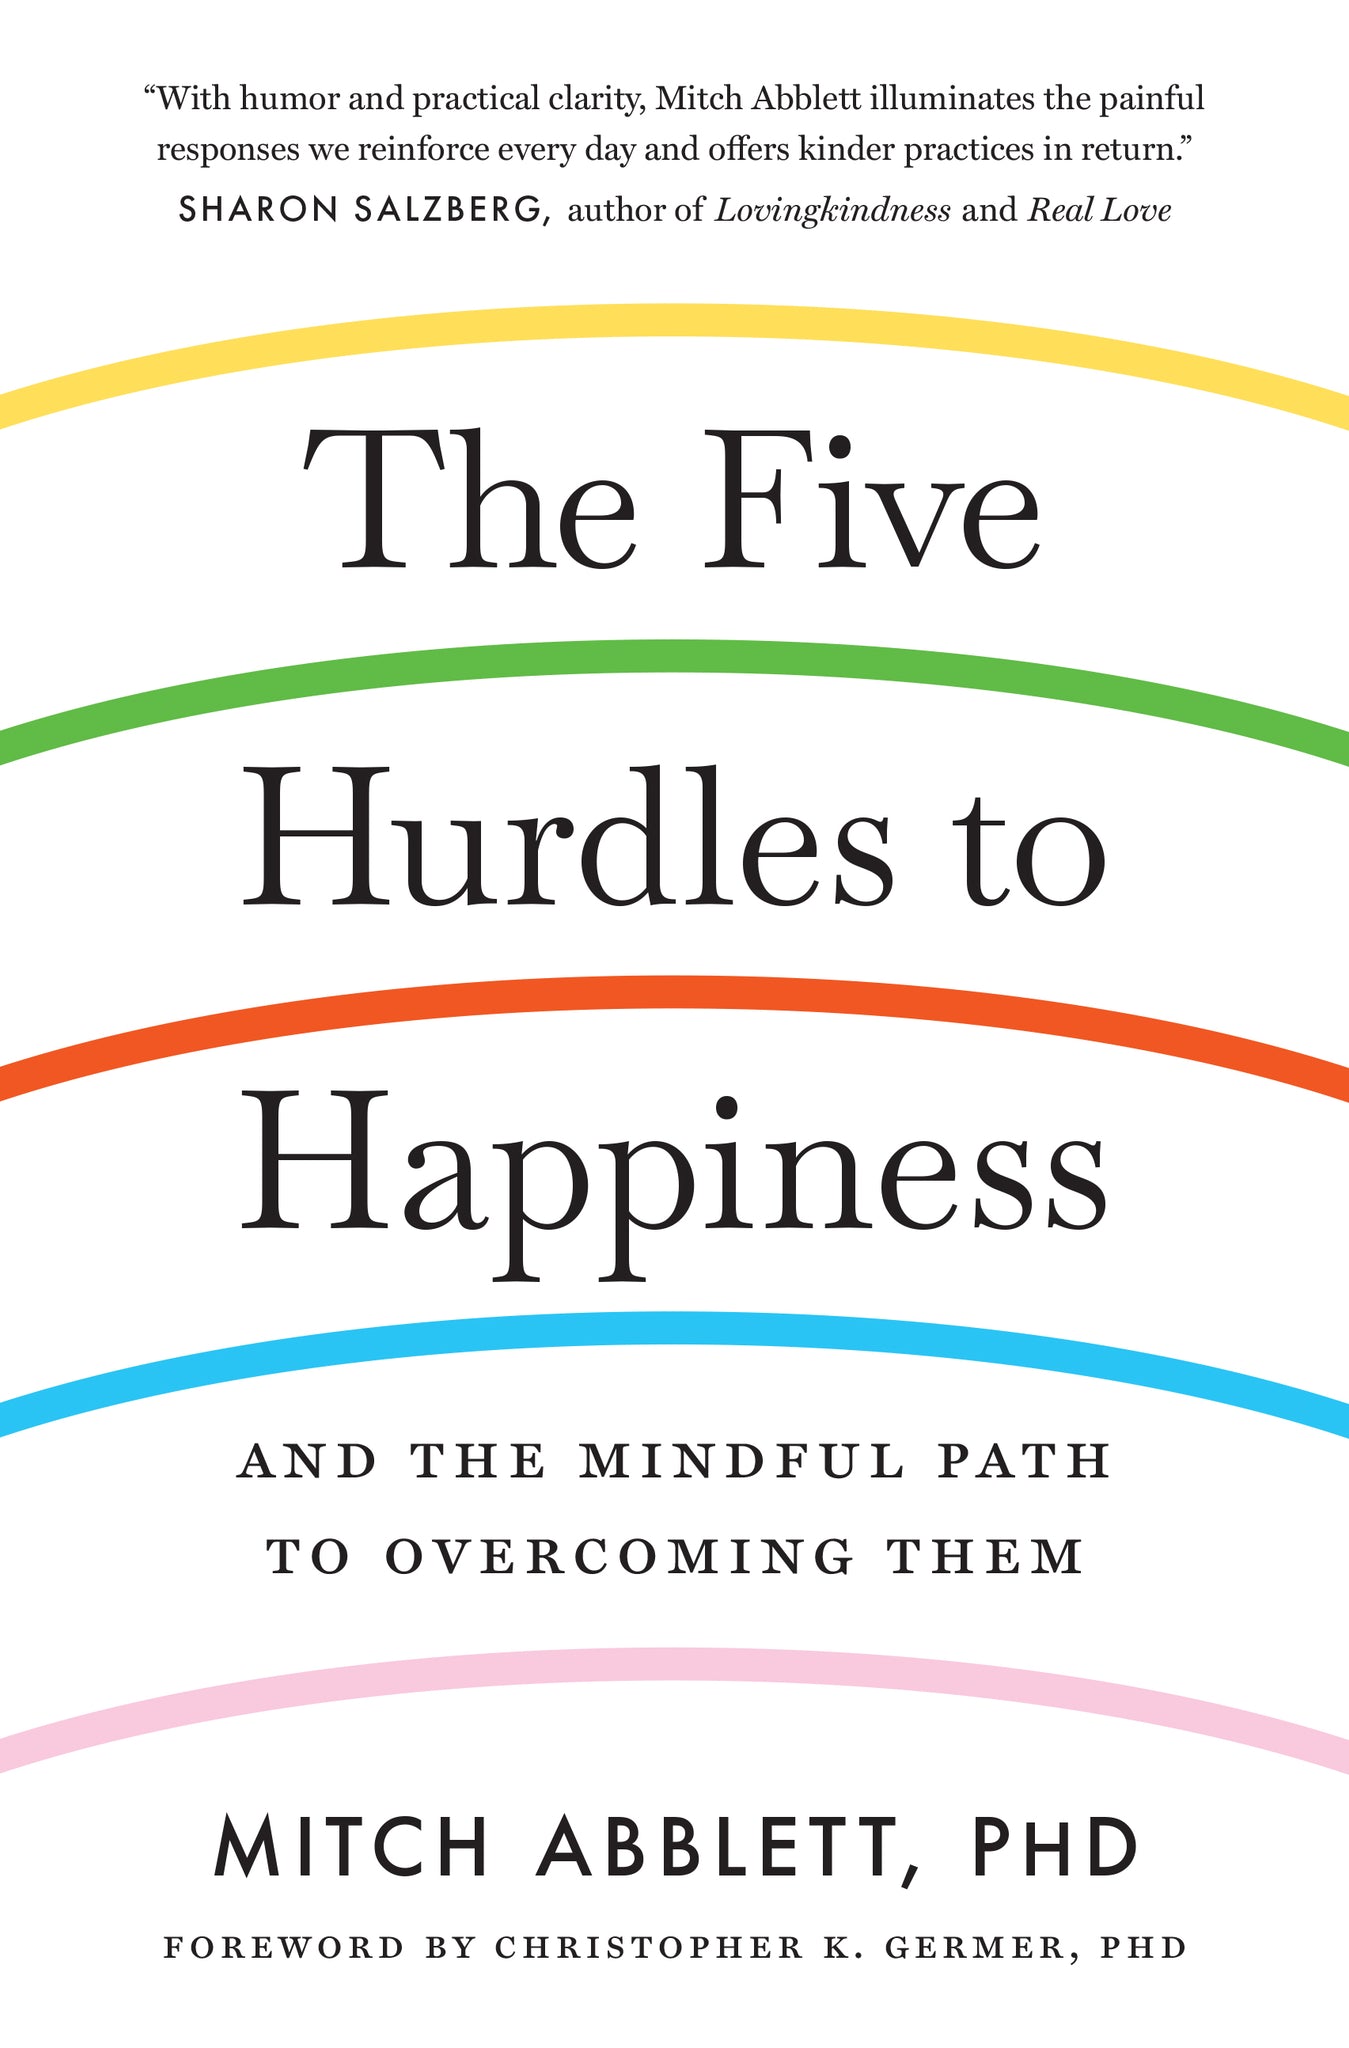 The Five Hurdles to Happiness by Mitch Abblett